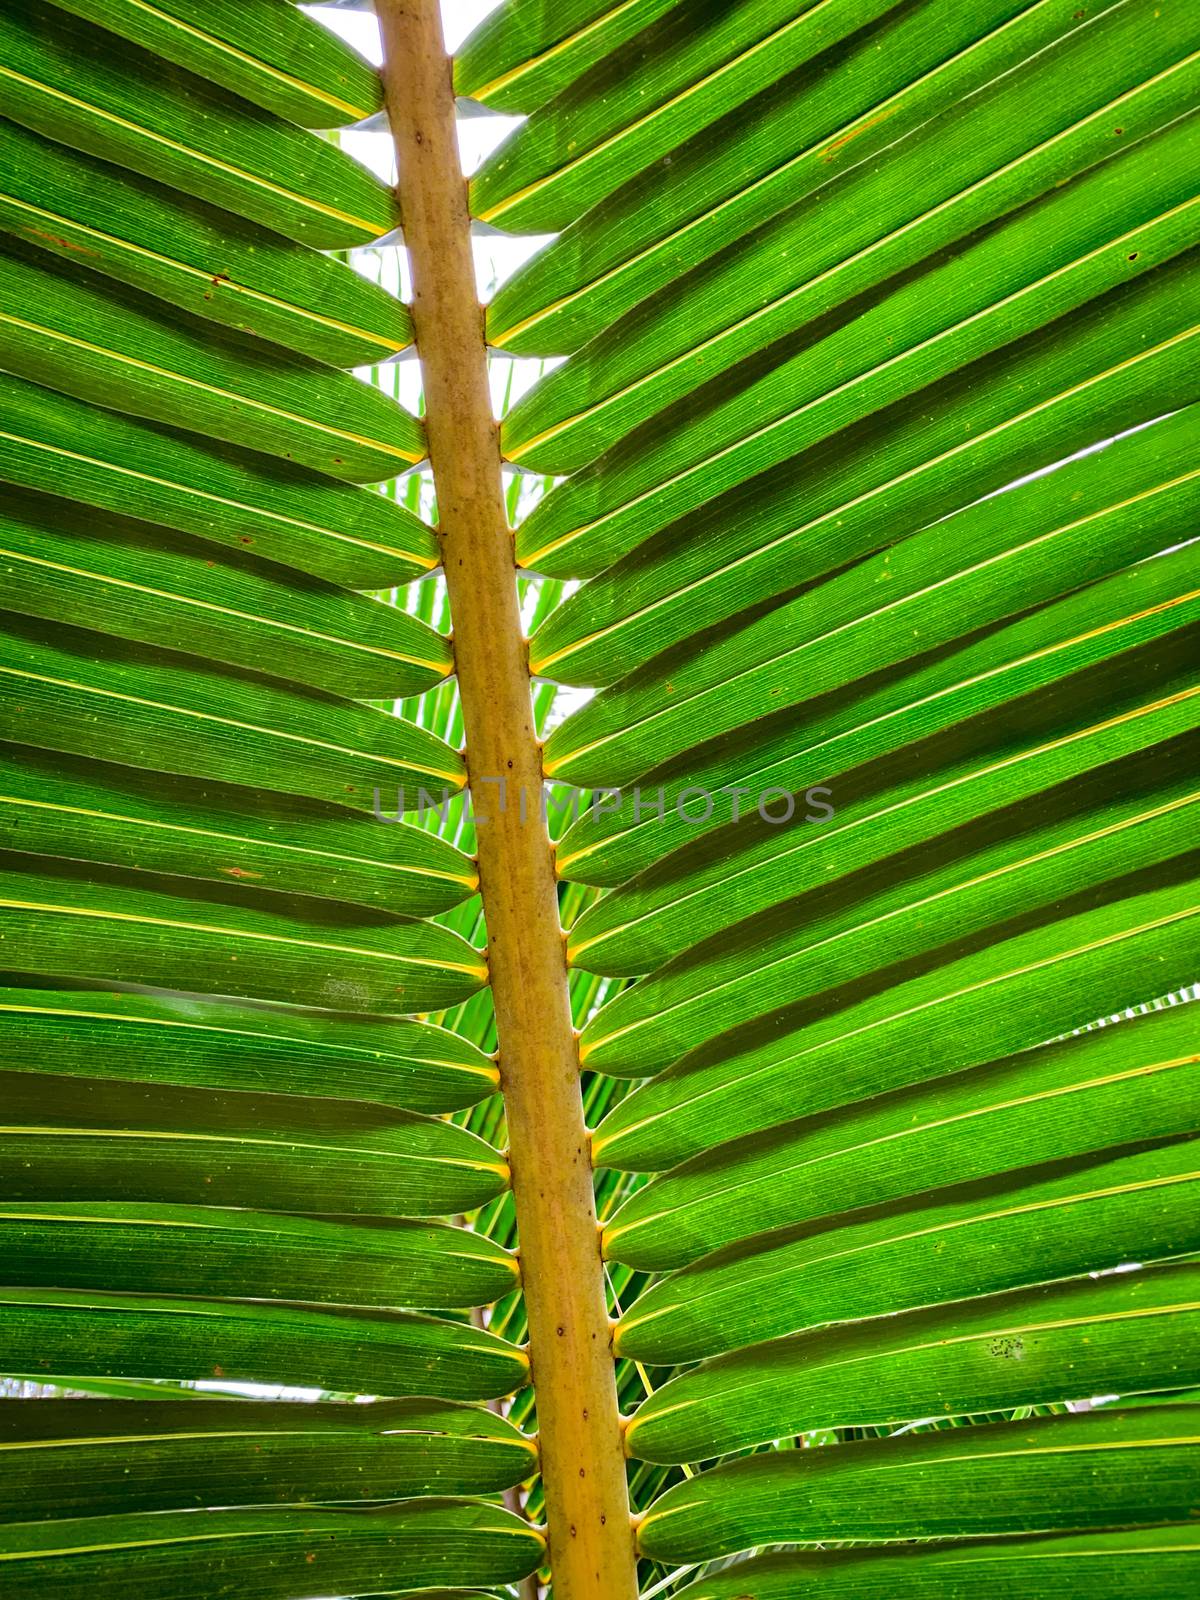 Under coconut leaves and stalk at tropical beach. Closeup palm tree. Coconut leaves pattern. Summer vacation background. Texture green leaf of palm. Tropical environment. Resort decoration.